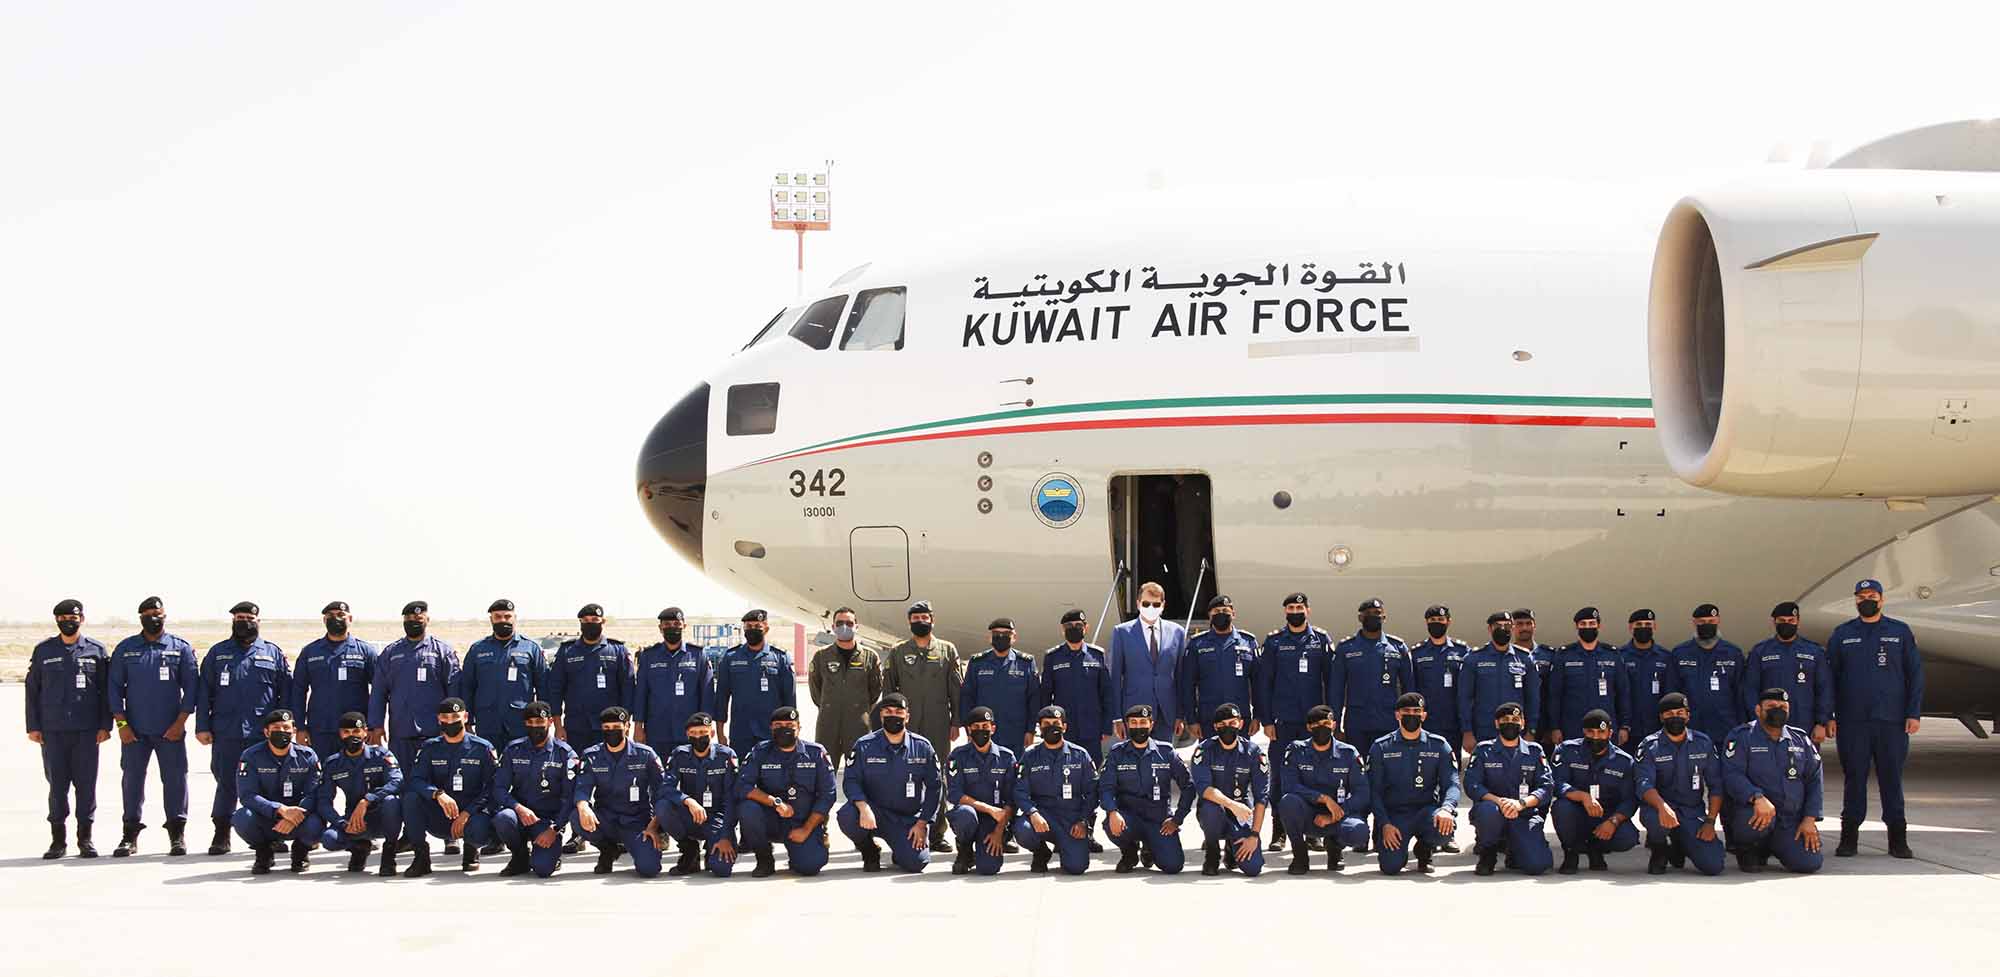 Kuwaiti army airplanes departures to Greece for help put out wildfires